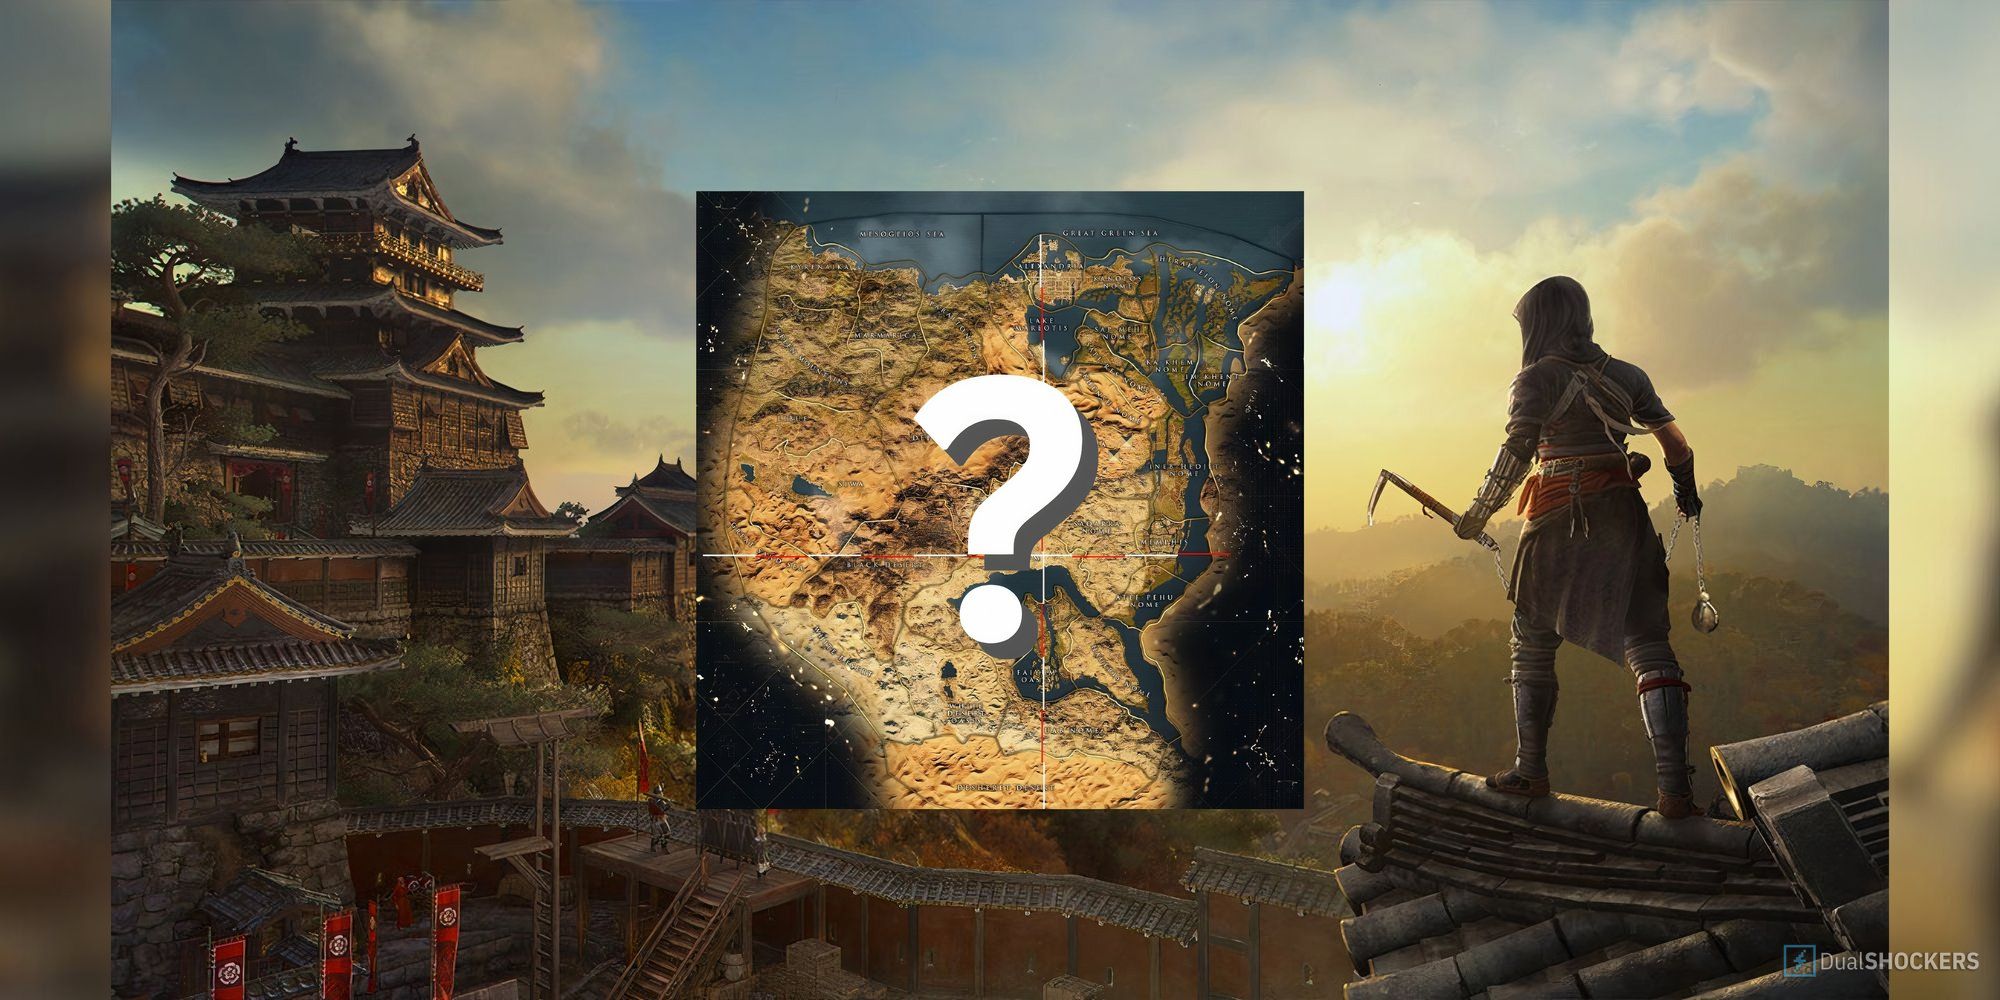 Feature image of Naoe from Assassin's Creed Shadows looking out over Japan from a rooftop and the Assassin's Creed Origins map in the middle with a question mark.